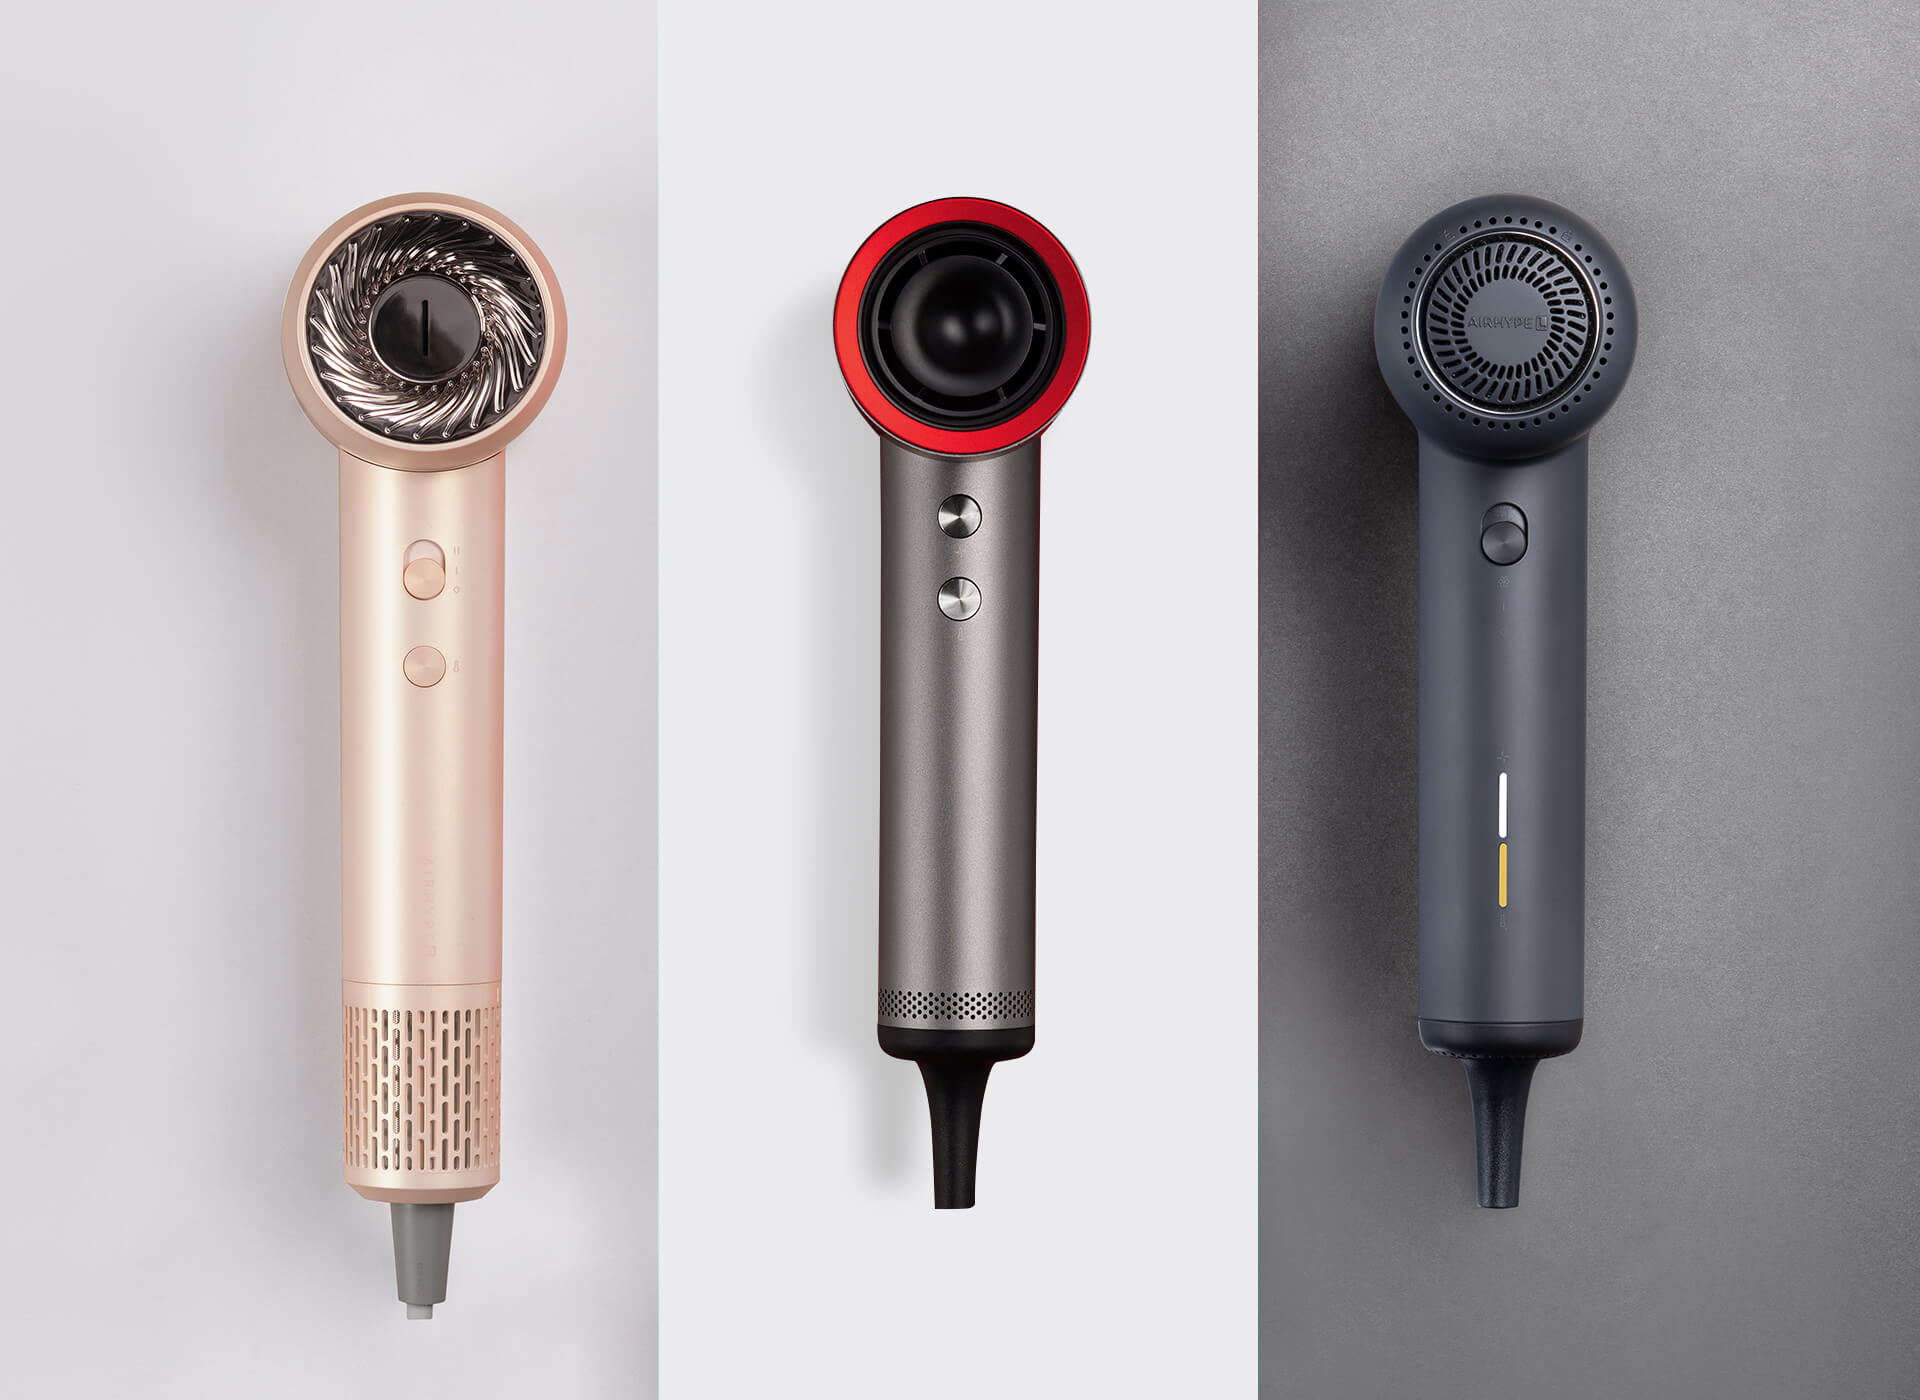 TYMO AIRHYPE hair dryer and TYMO AIRHYPE COMPACT are presented, showcasing high-end tools for versatile hair styling.